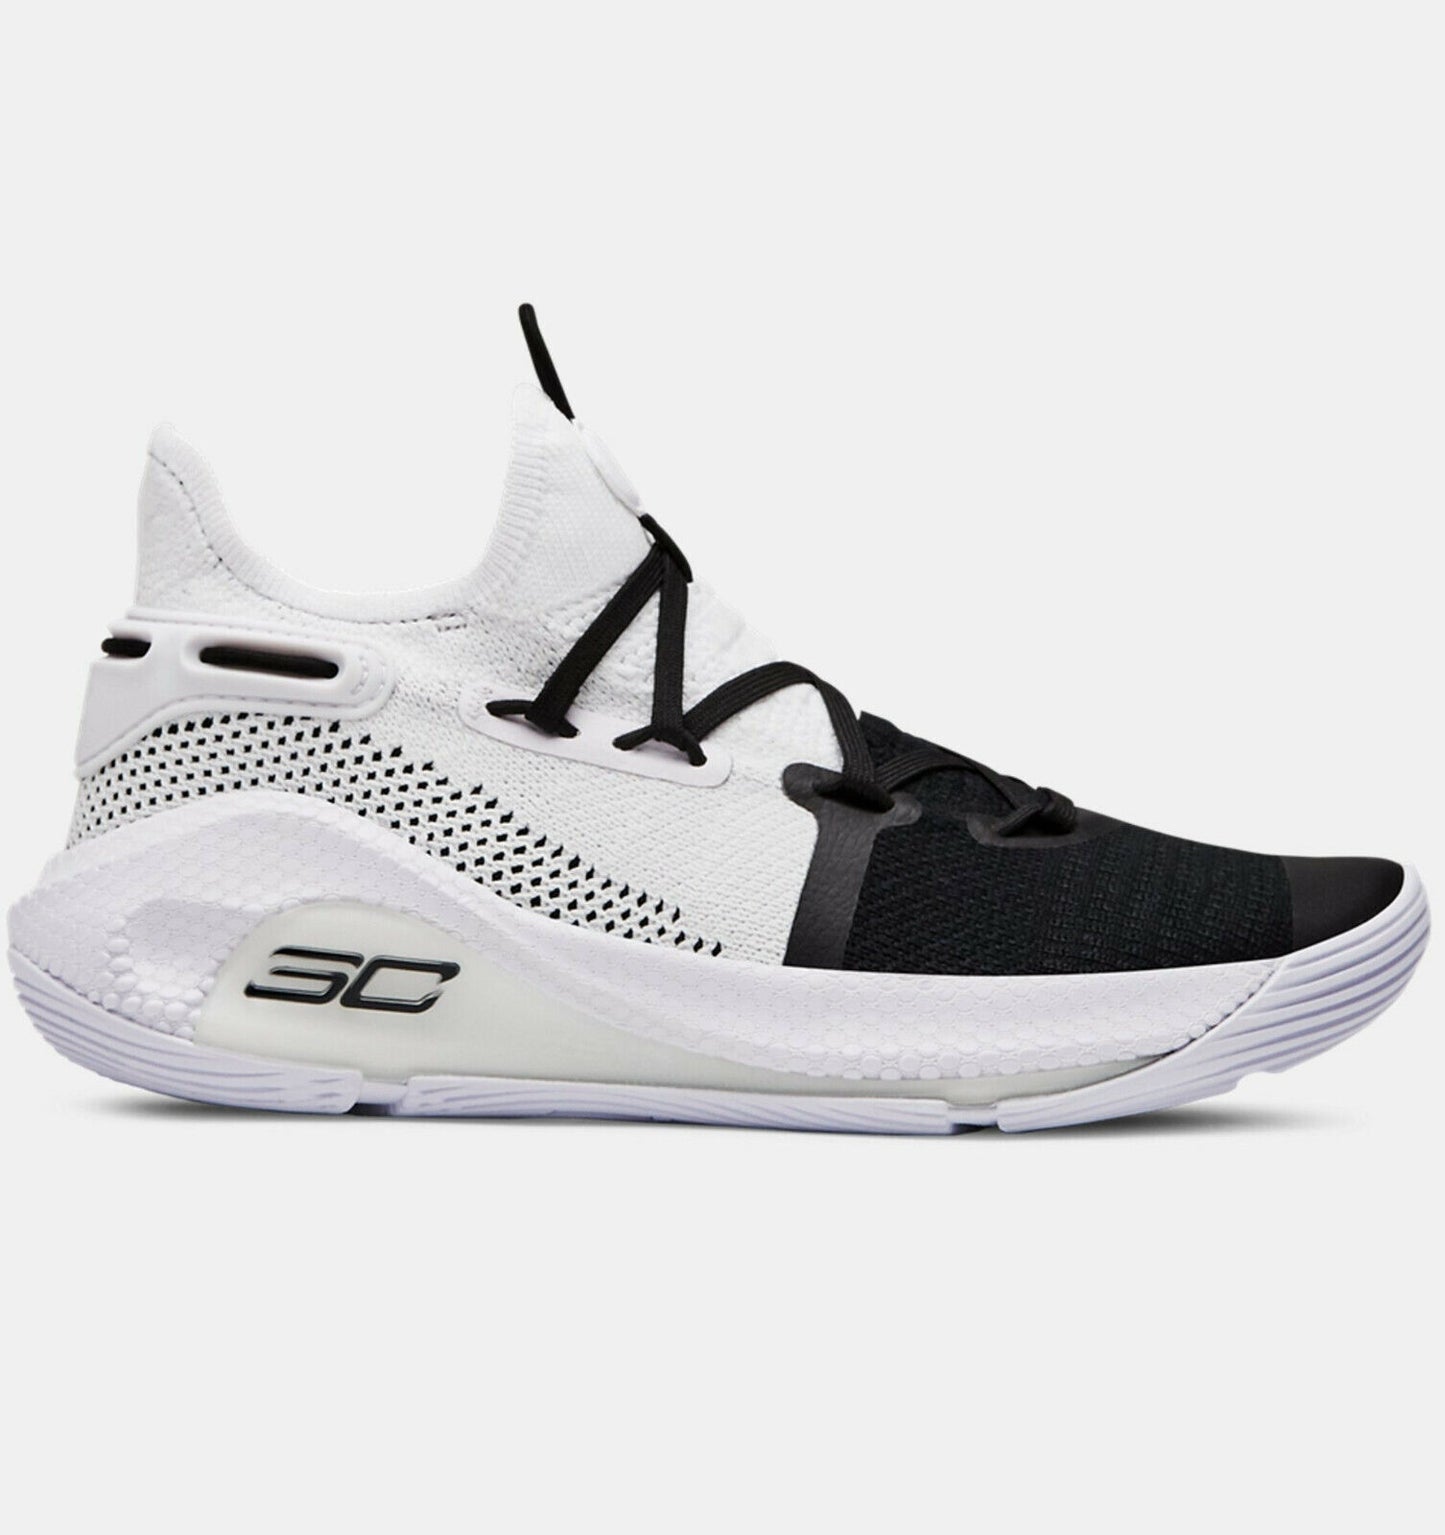 SALE Under Armour Curry 6 Junior Boys Girls Basketball Shoes SIZE 3 3.5 4 White